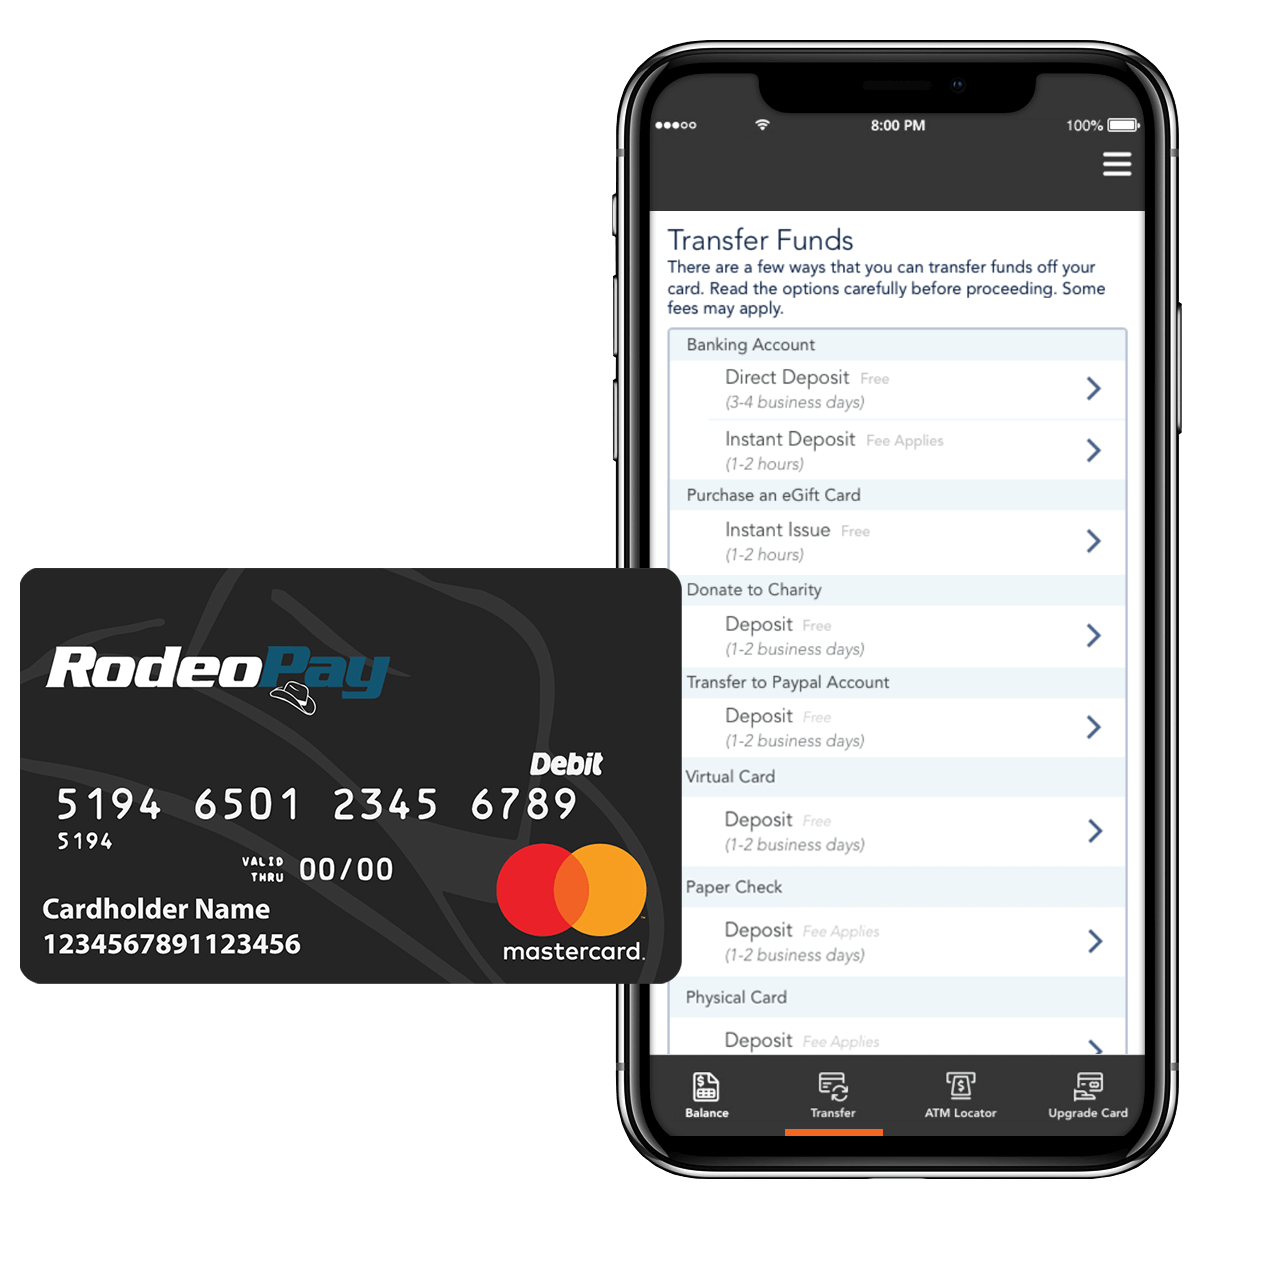 RodeoPay card and mobile app